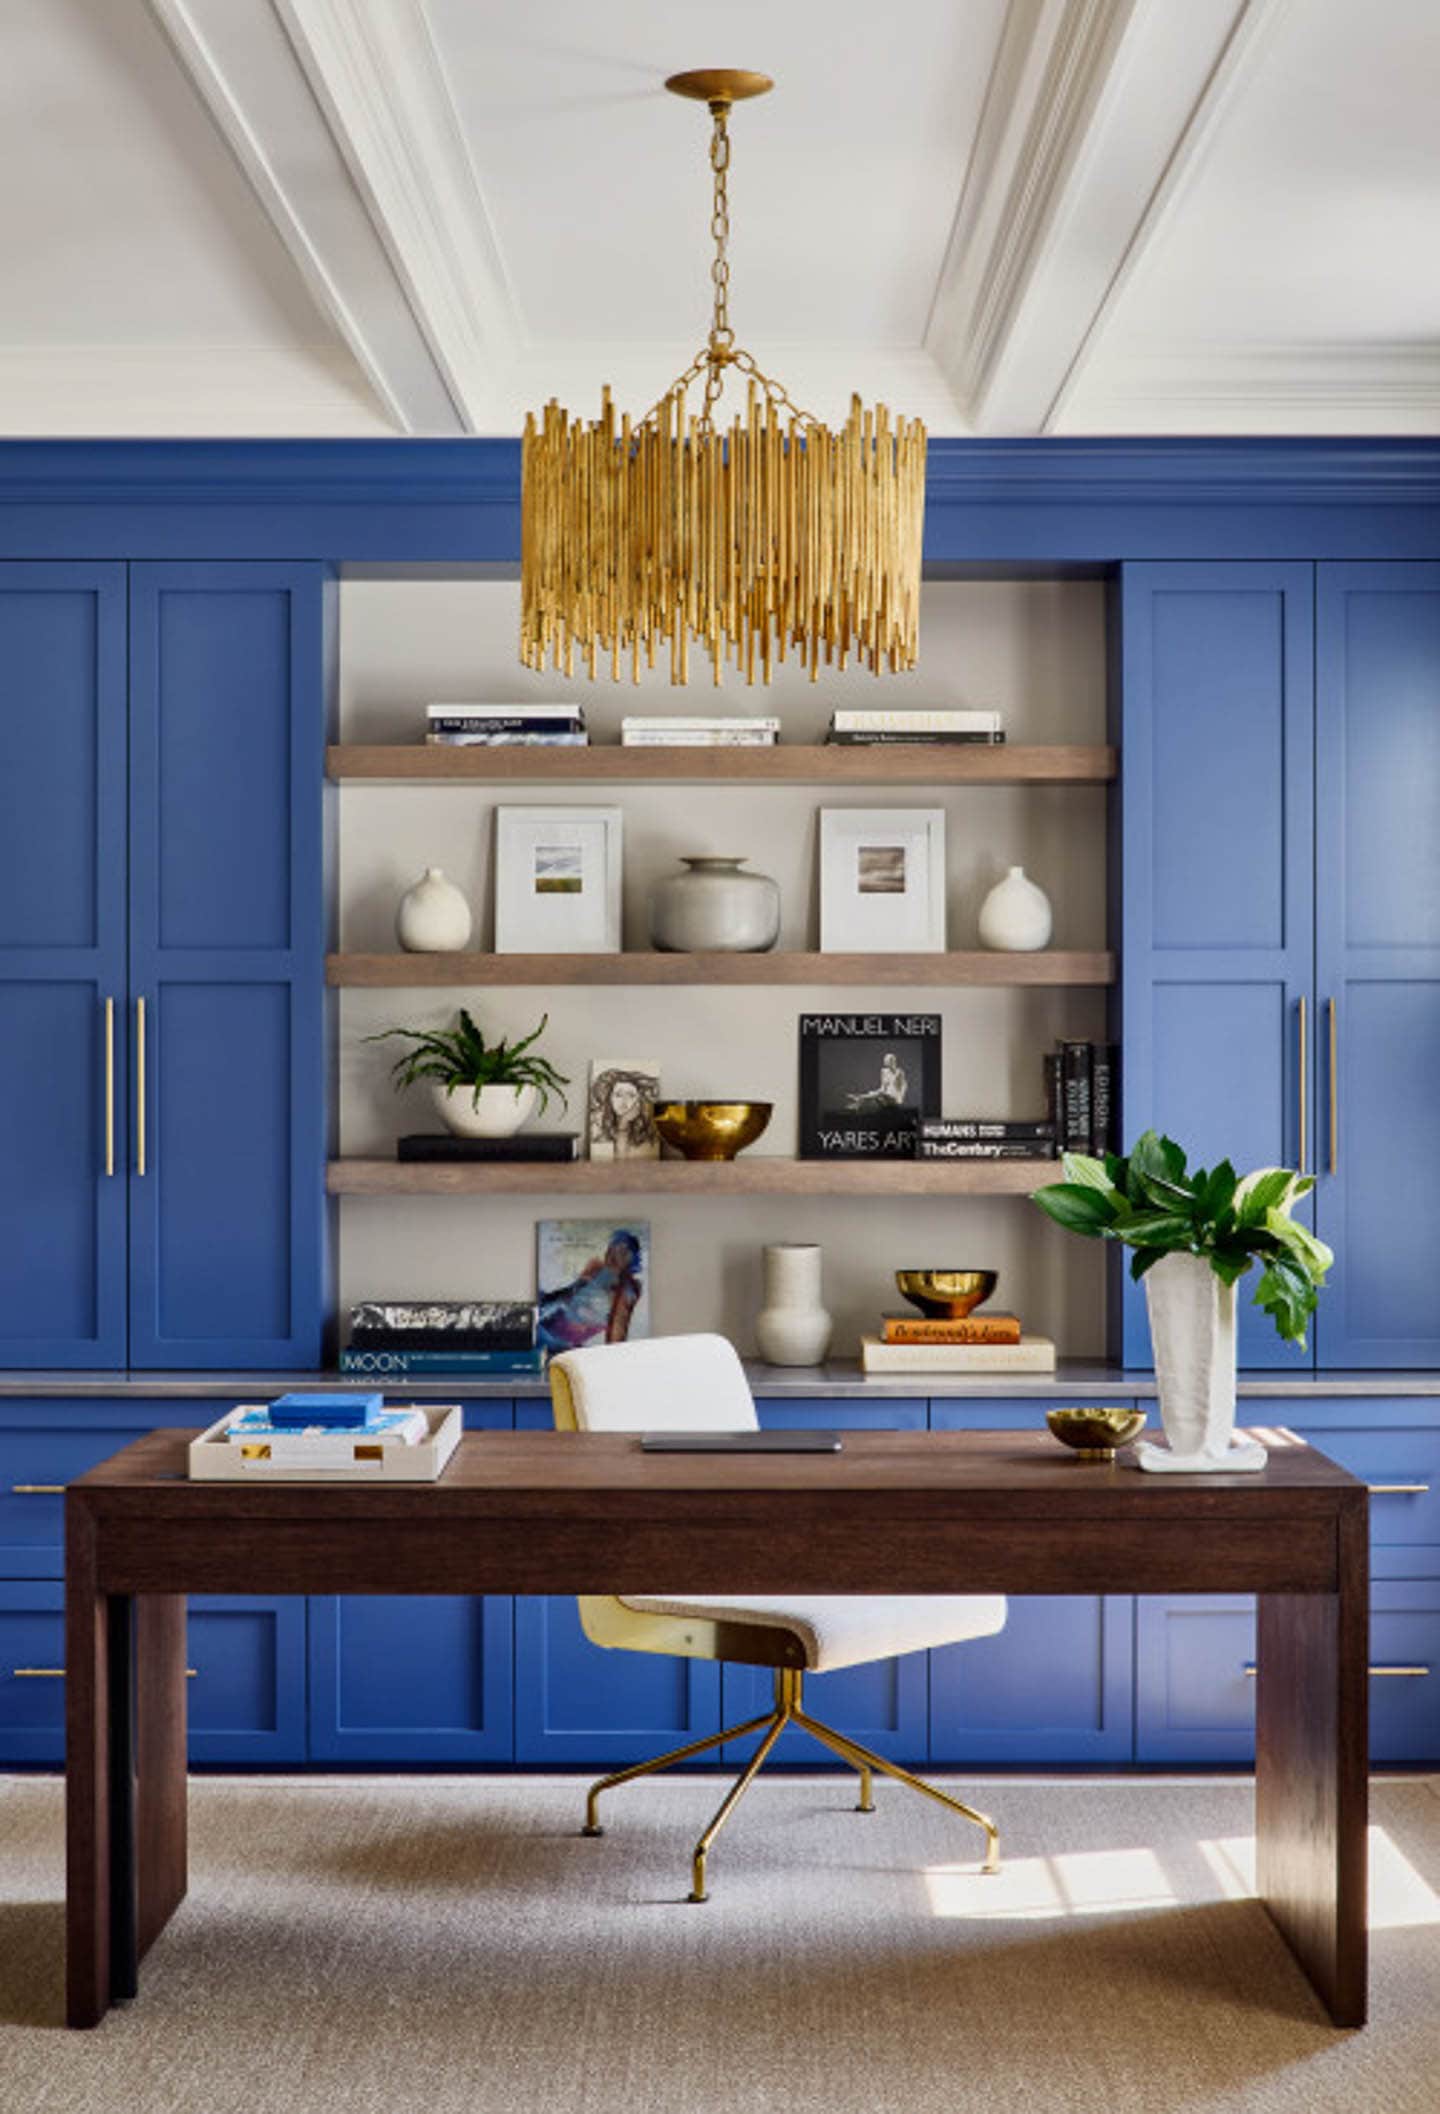 Wood desk in front of royal blue cabinets with a large gold chandelier hanging from the ceiling